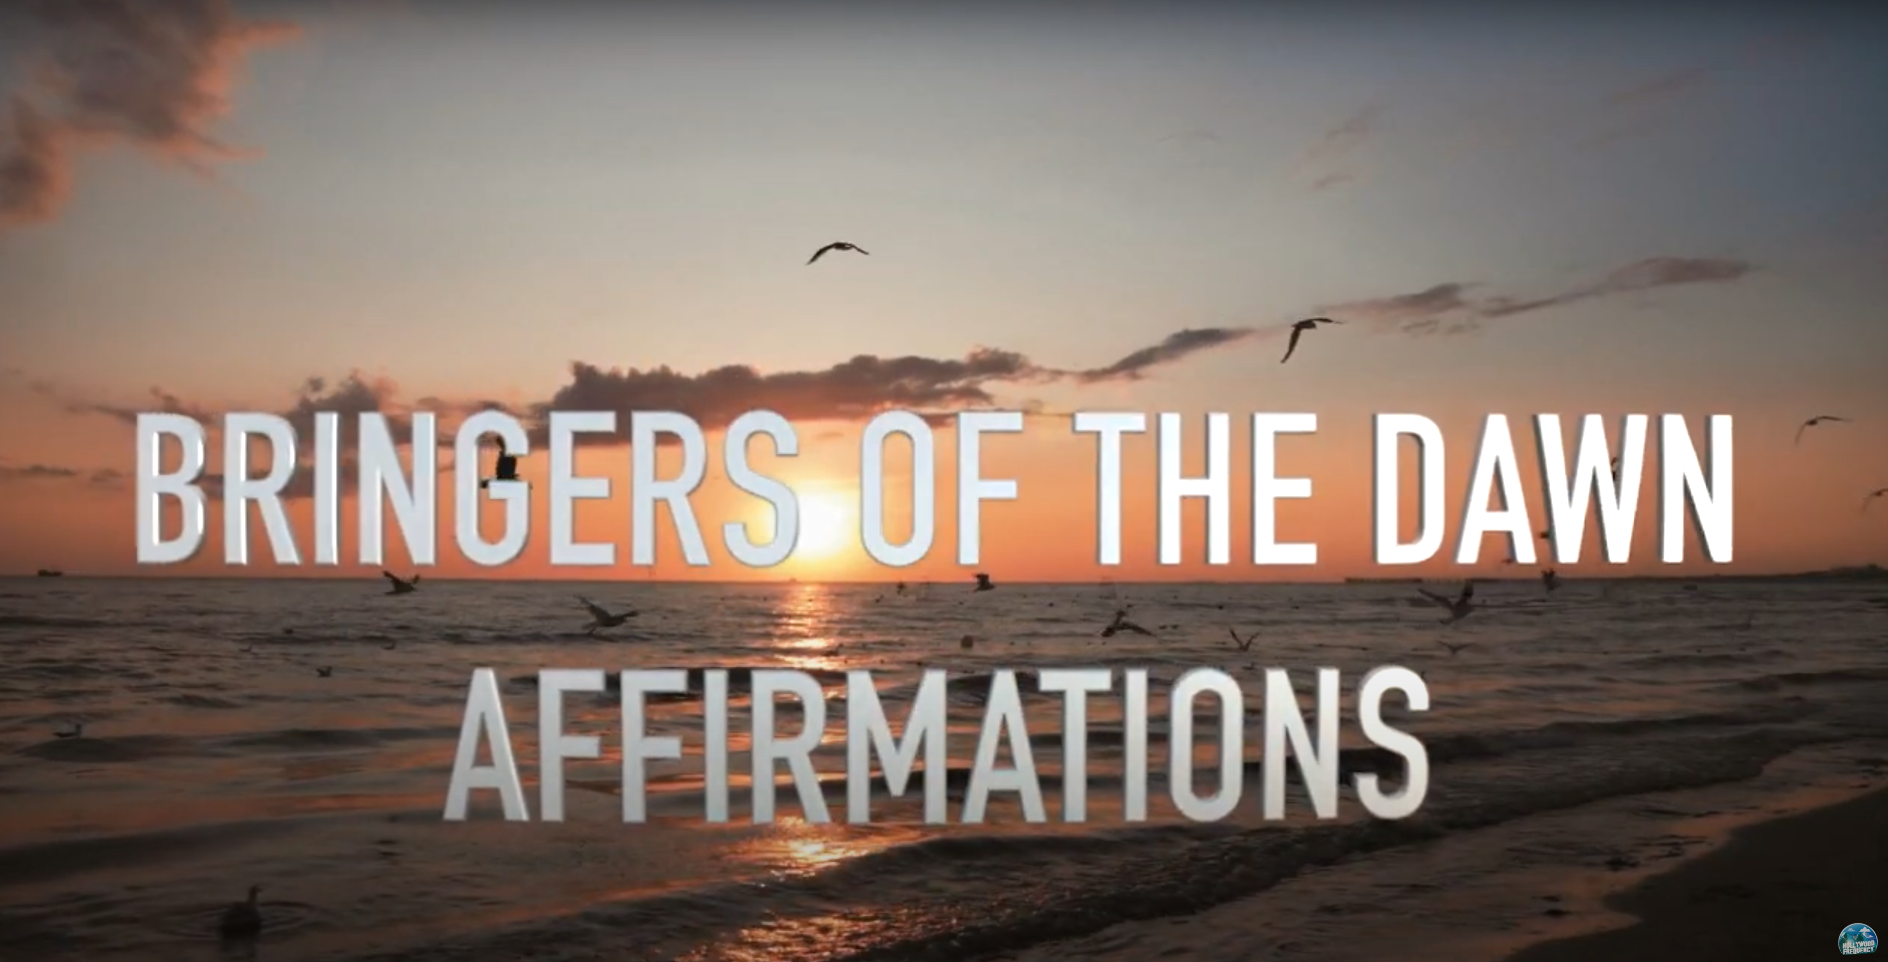 Bringers of the Dawn Affirmations